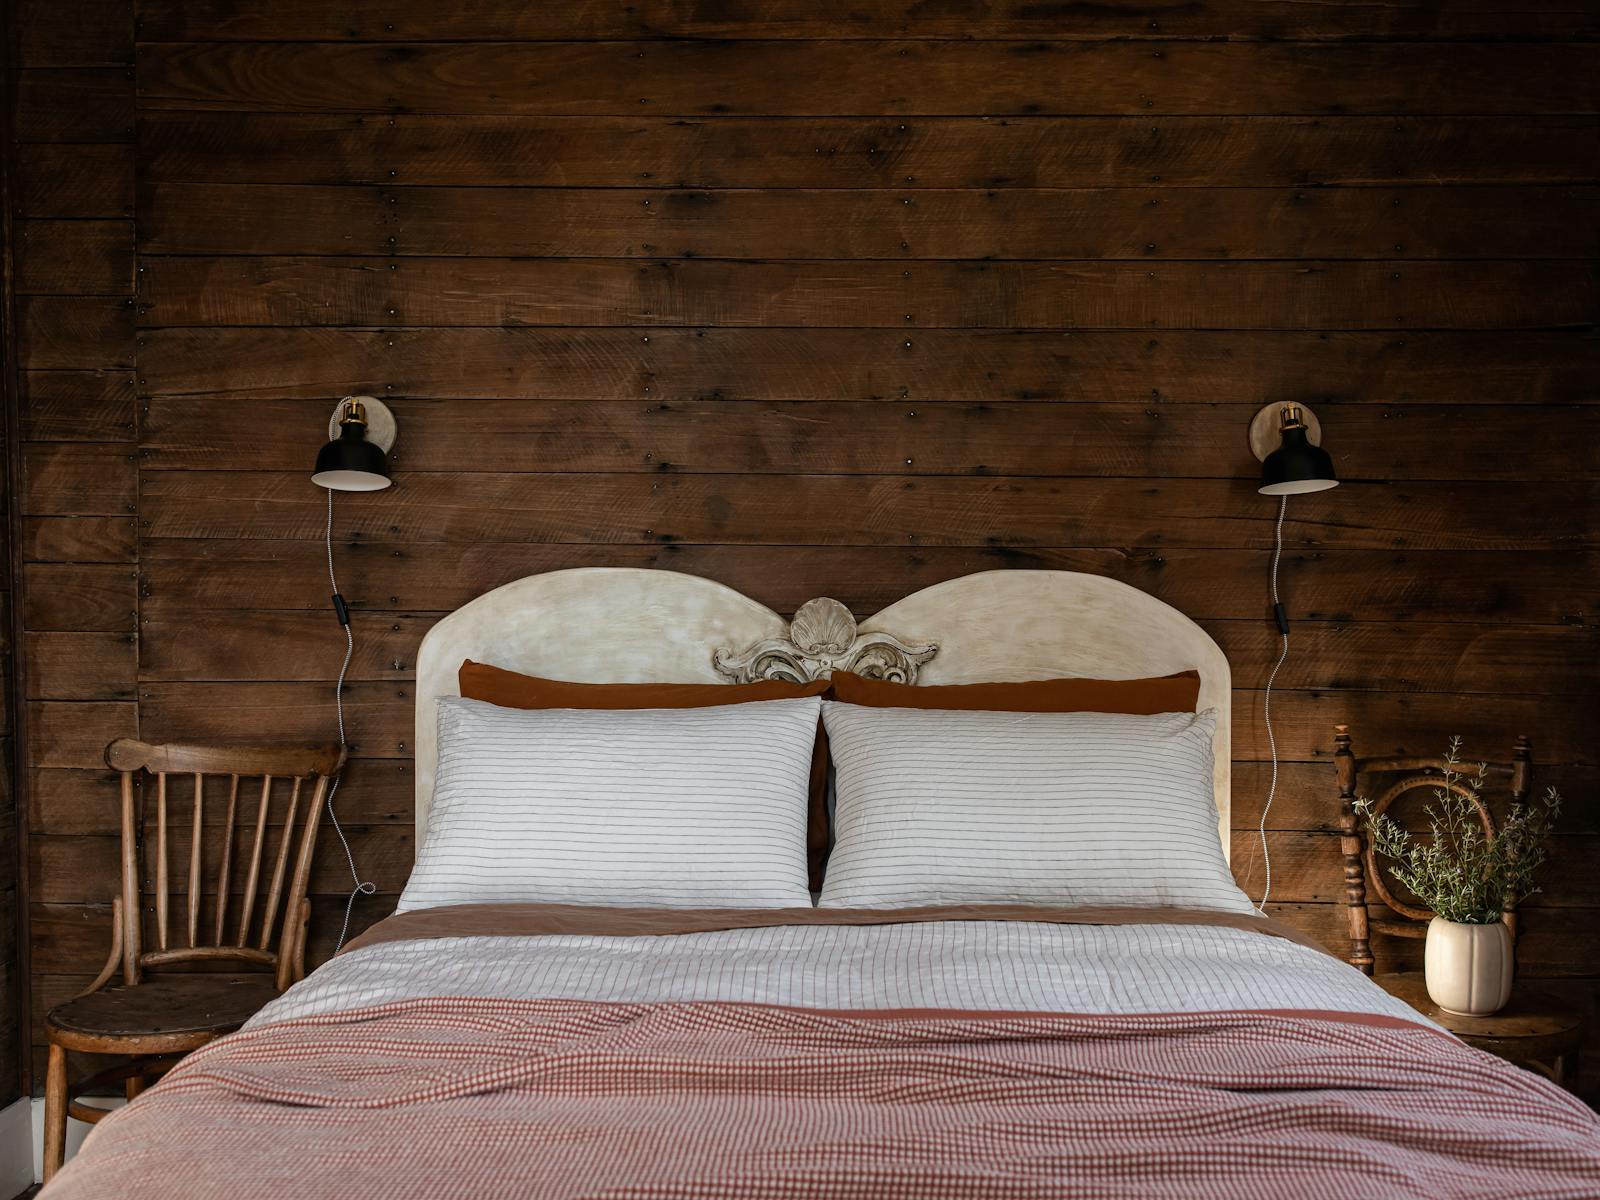 queen sized bed with luxury linen sheets in antique timber room